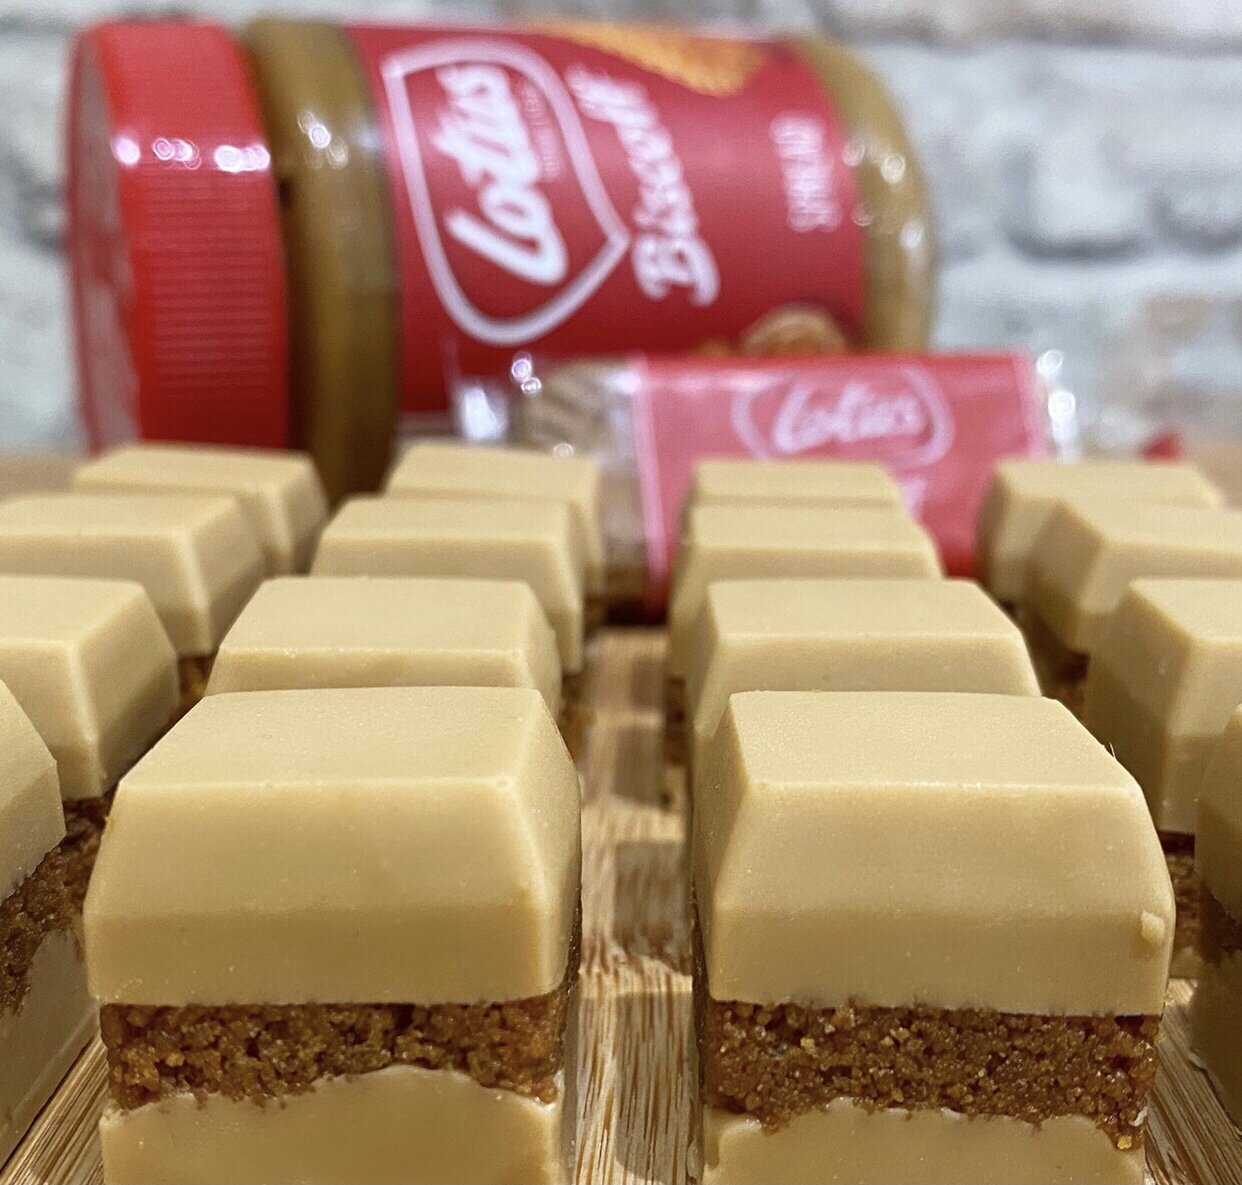 Lotus Biscoff Cube – Two-Bite Bakers